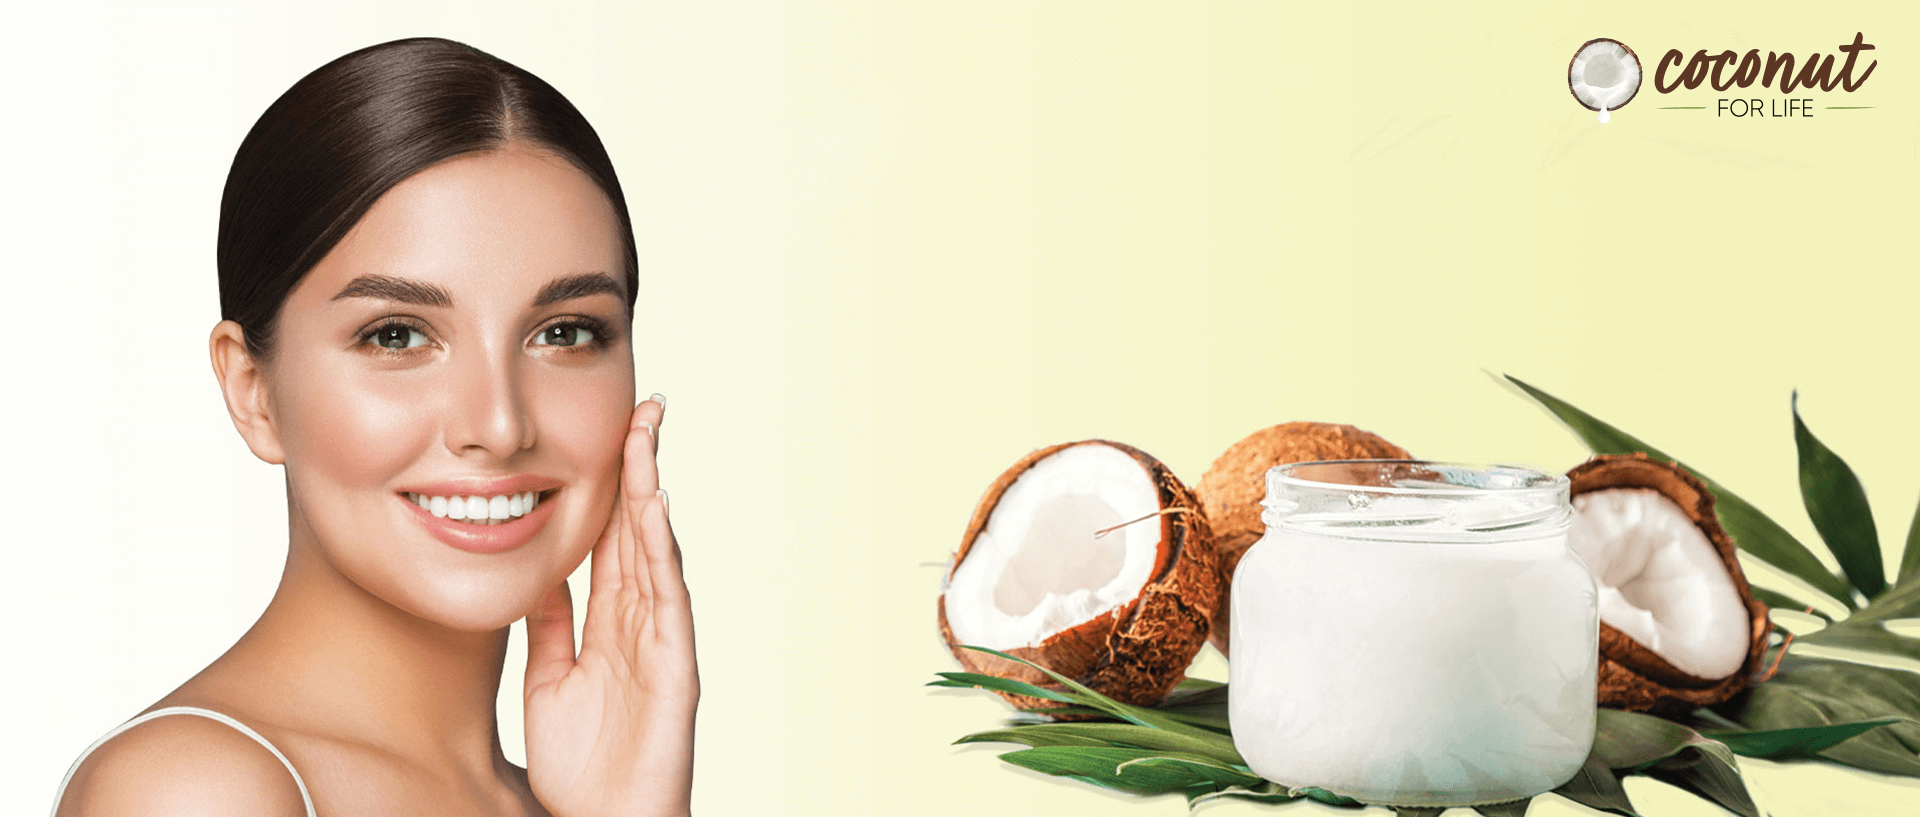 Get Brighter skin With Coconut Milk - Coconut For Life